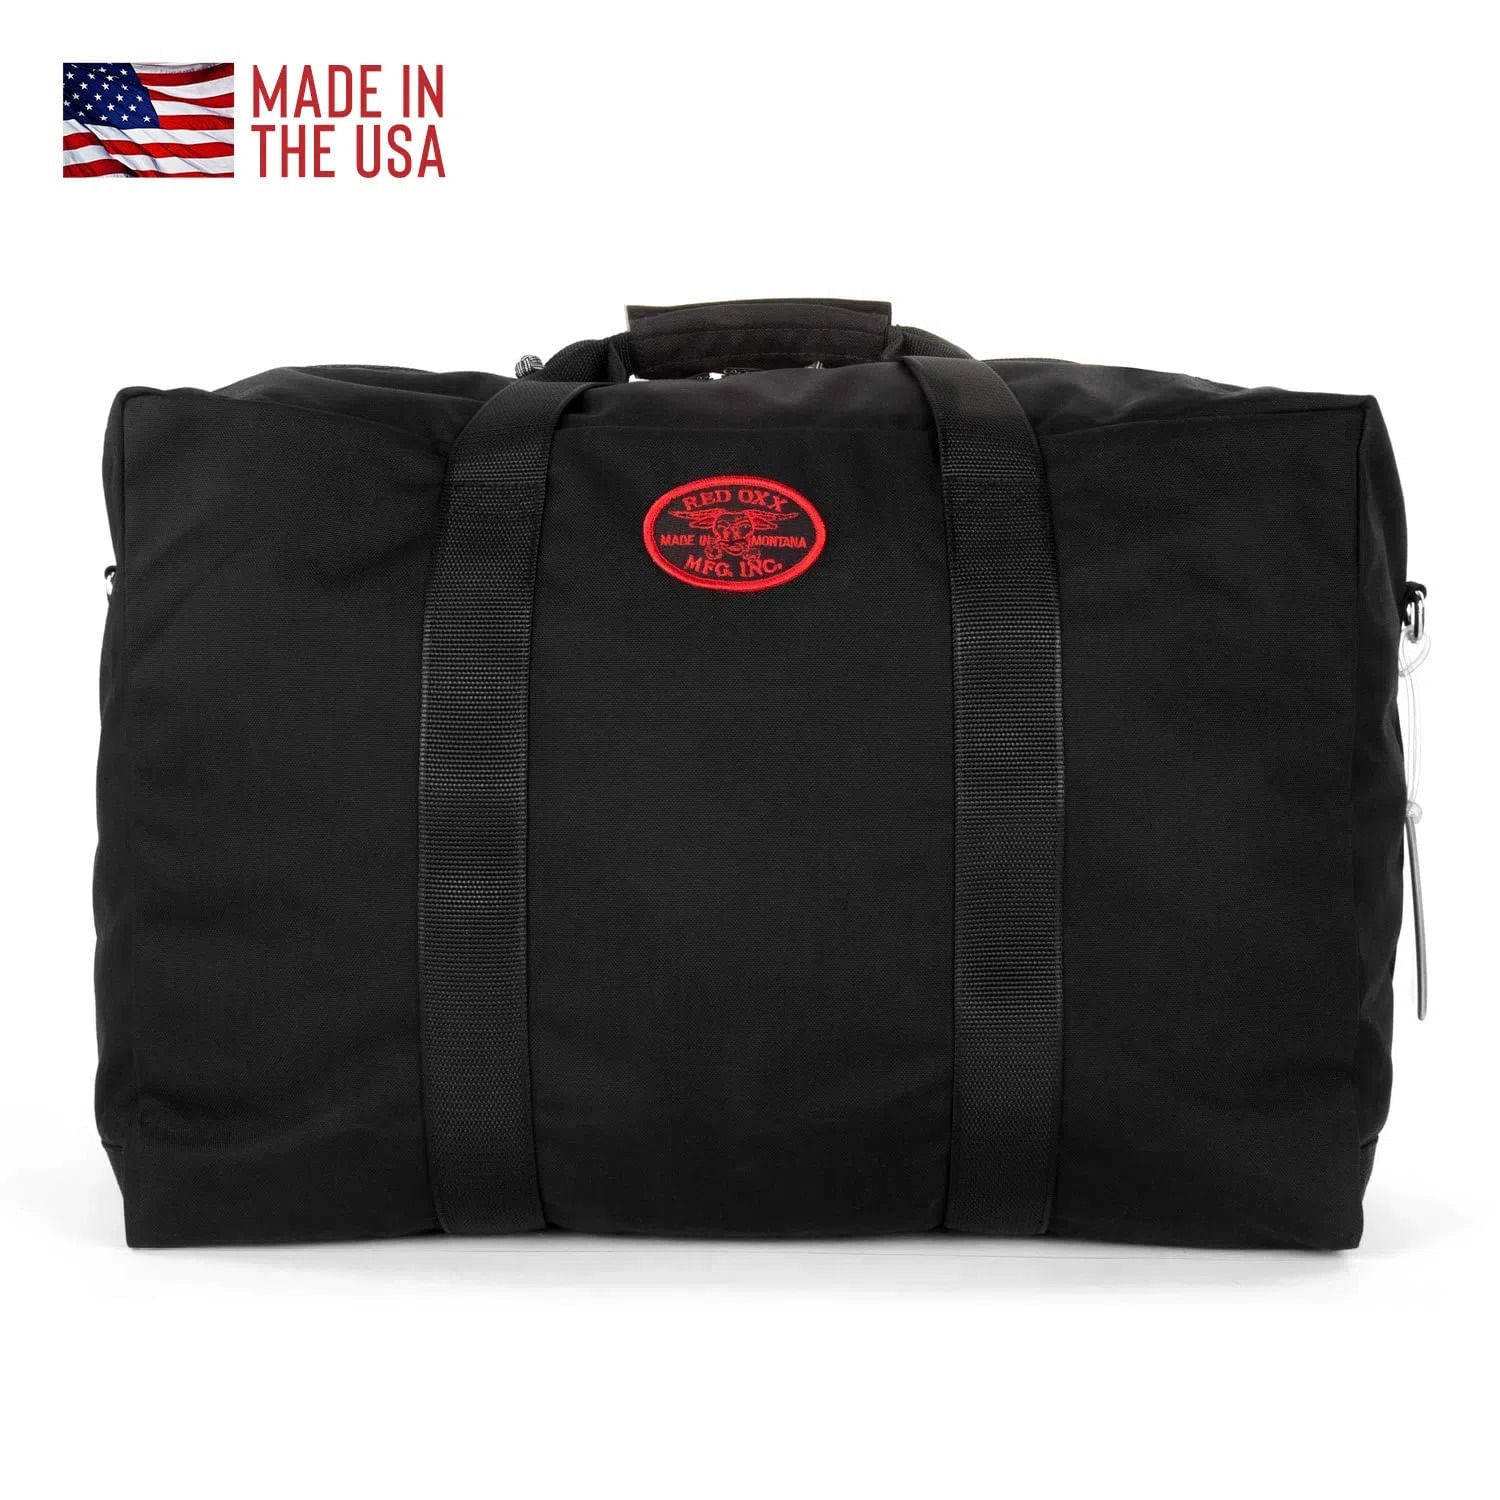 Red Oxx medium aviators kit bag available in Black only. 